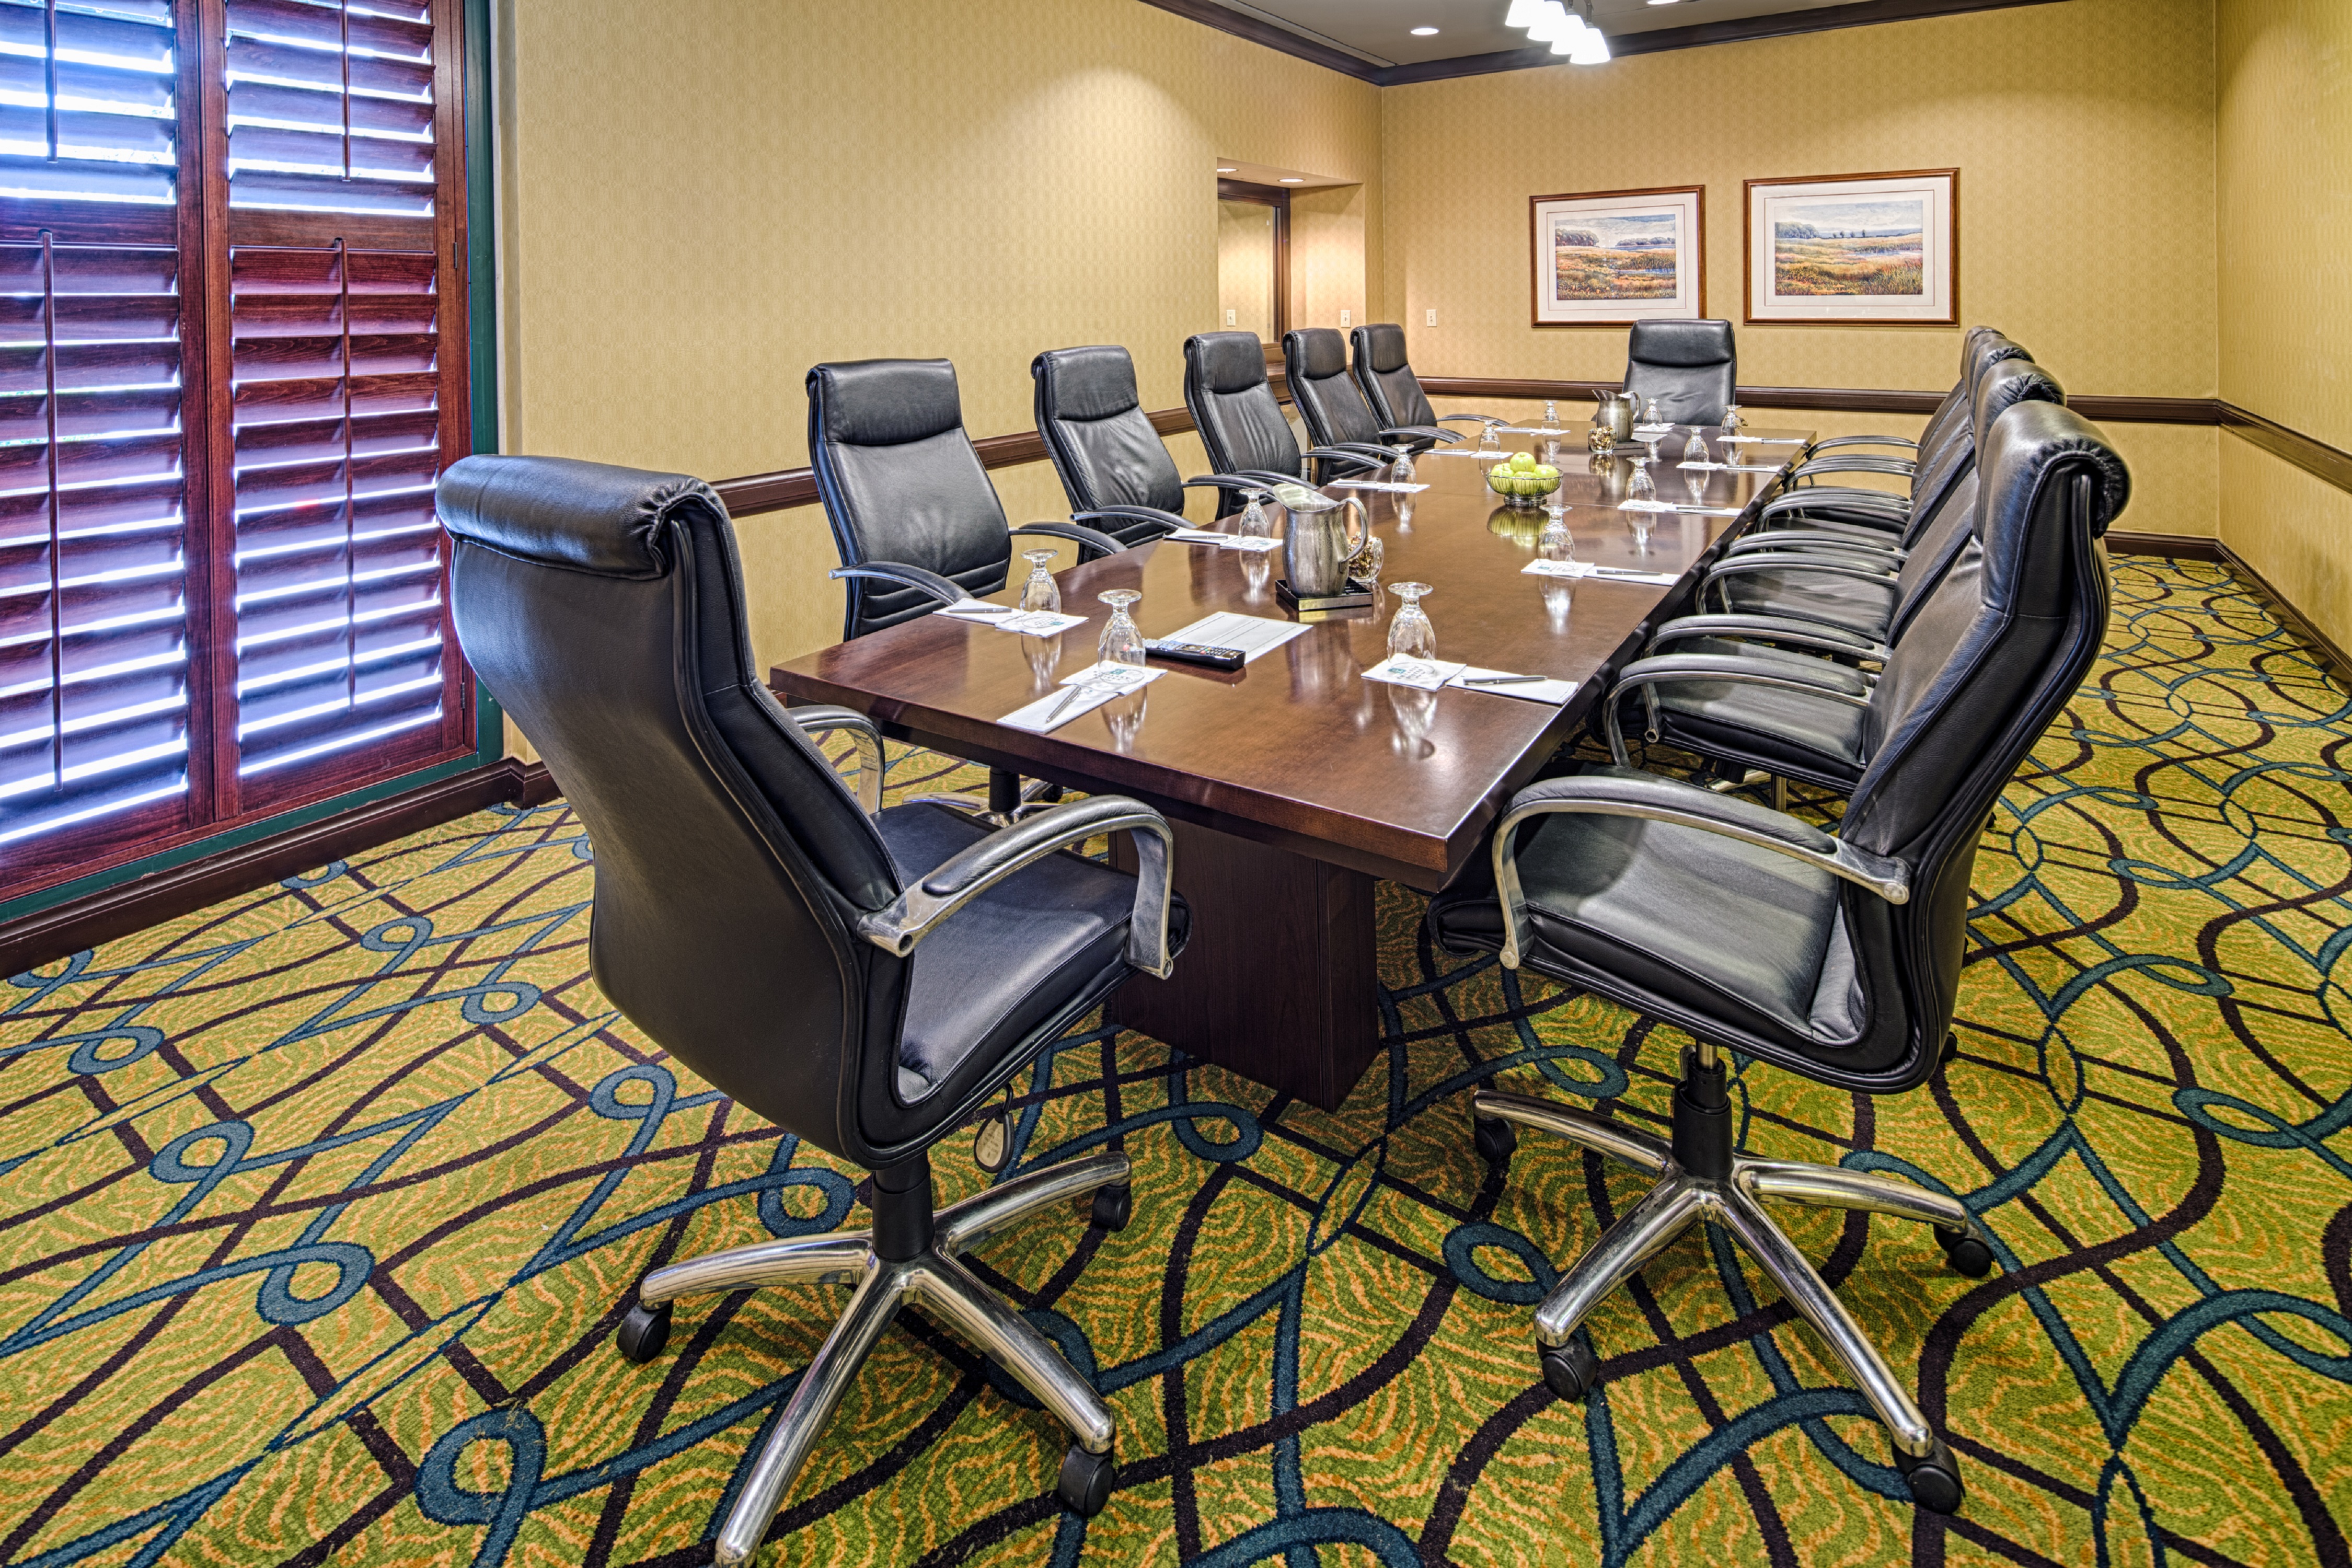 Boardroom West Meeting Space with long table a chairs